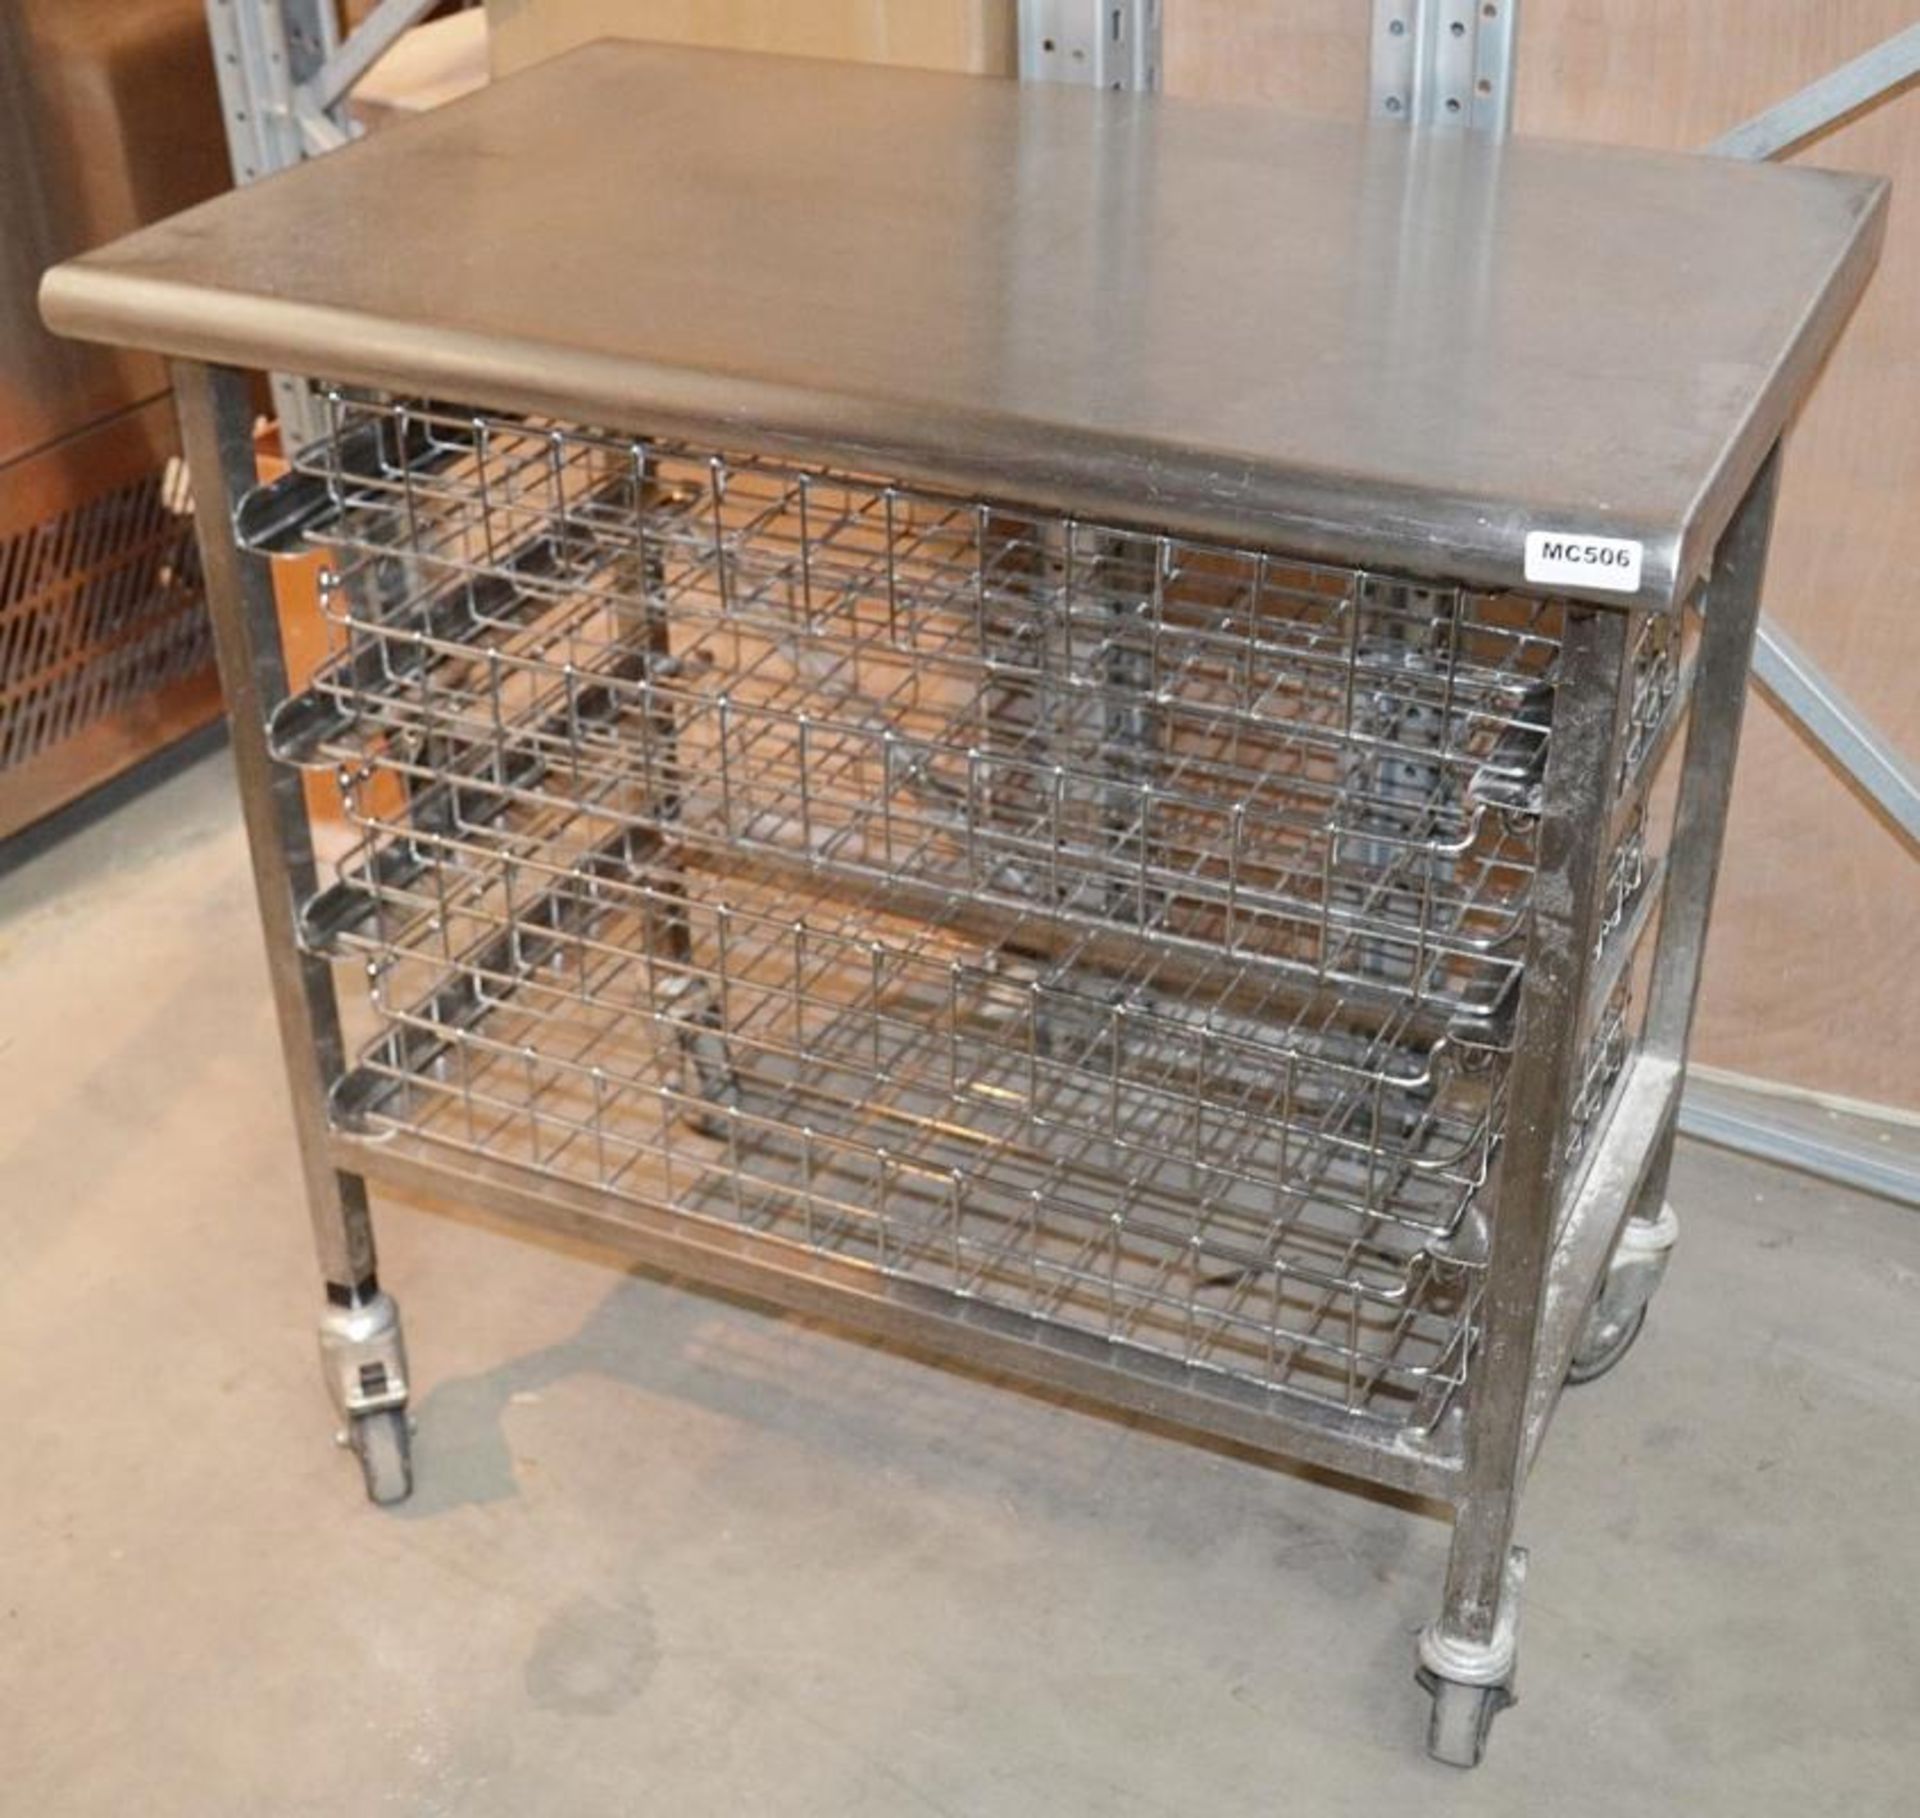 1 x Stainless Steel Commercial Kitchen 4-Basket Trolley On Castors - Dimensions: W90.5 x D60 x H88cm